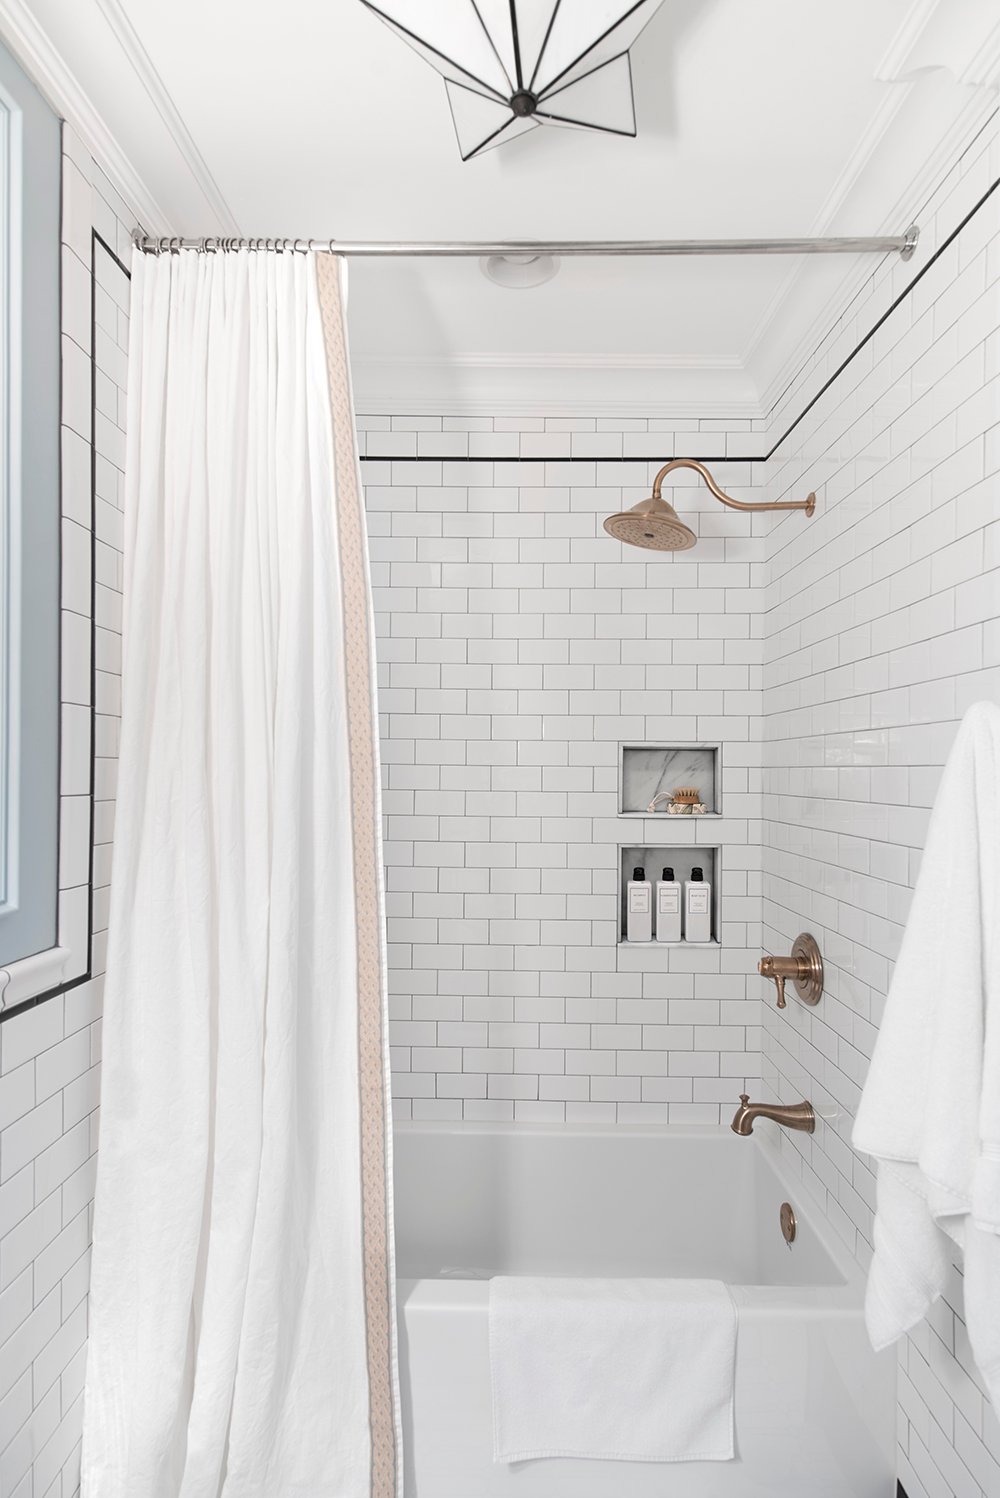 Extra Long Shower Curtain DIY - roomfortuesday.com